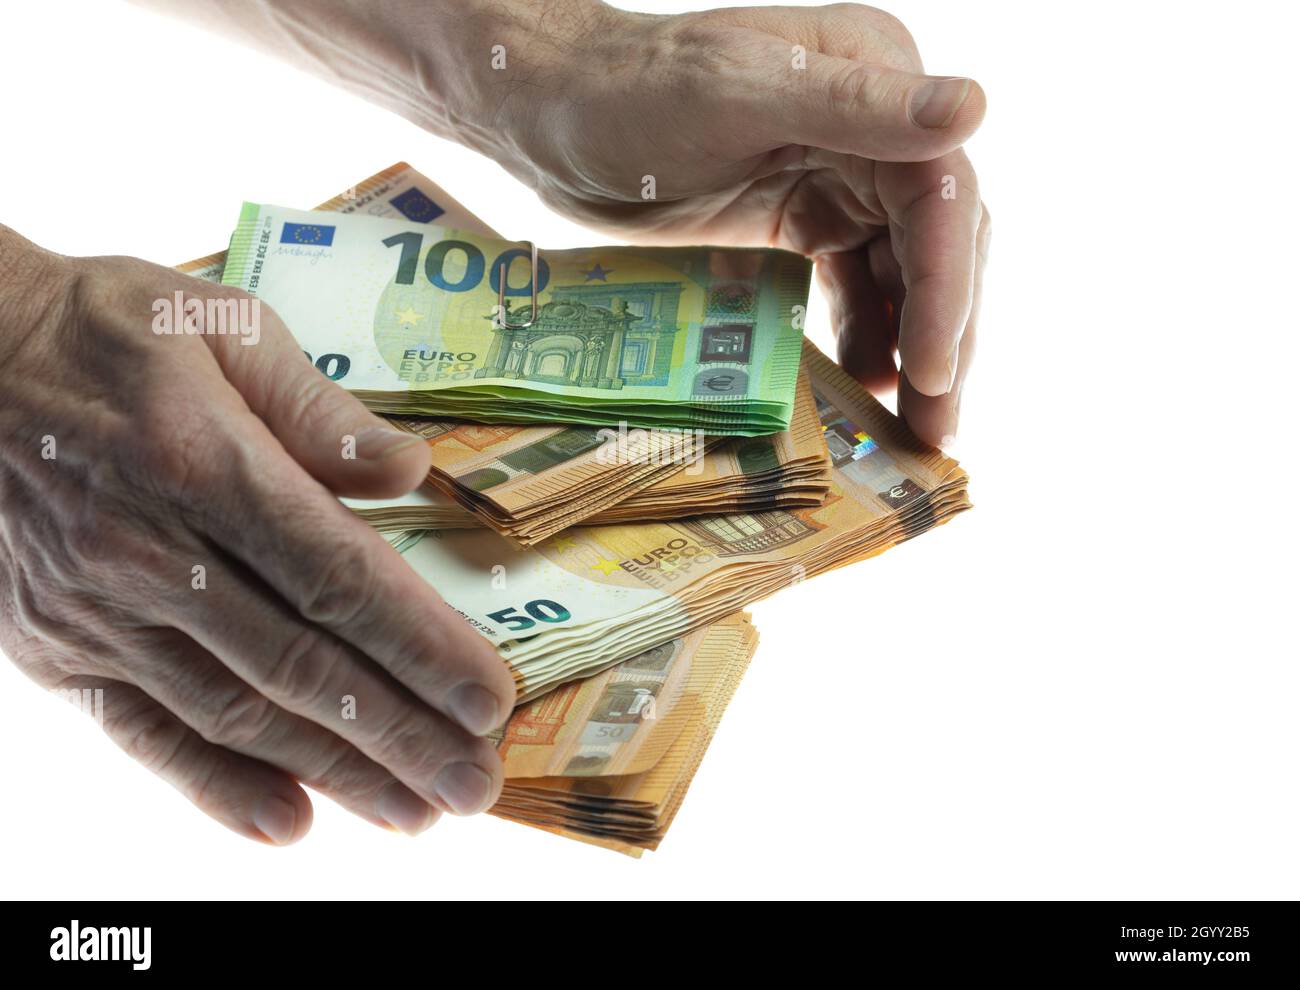 Hands reaching for a stack of euro notes Stock Photo